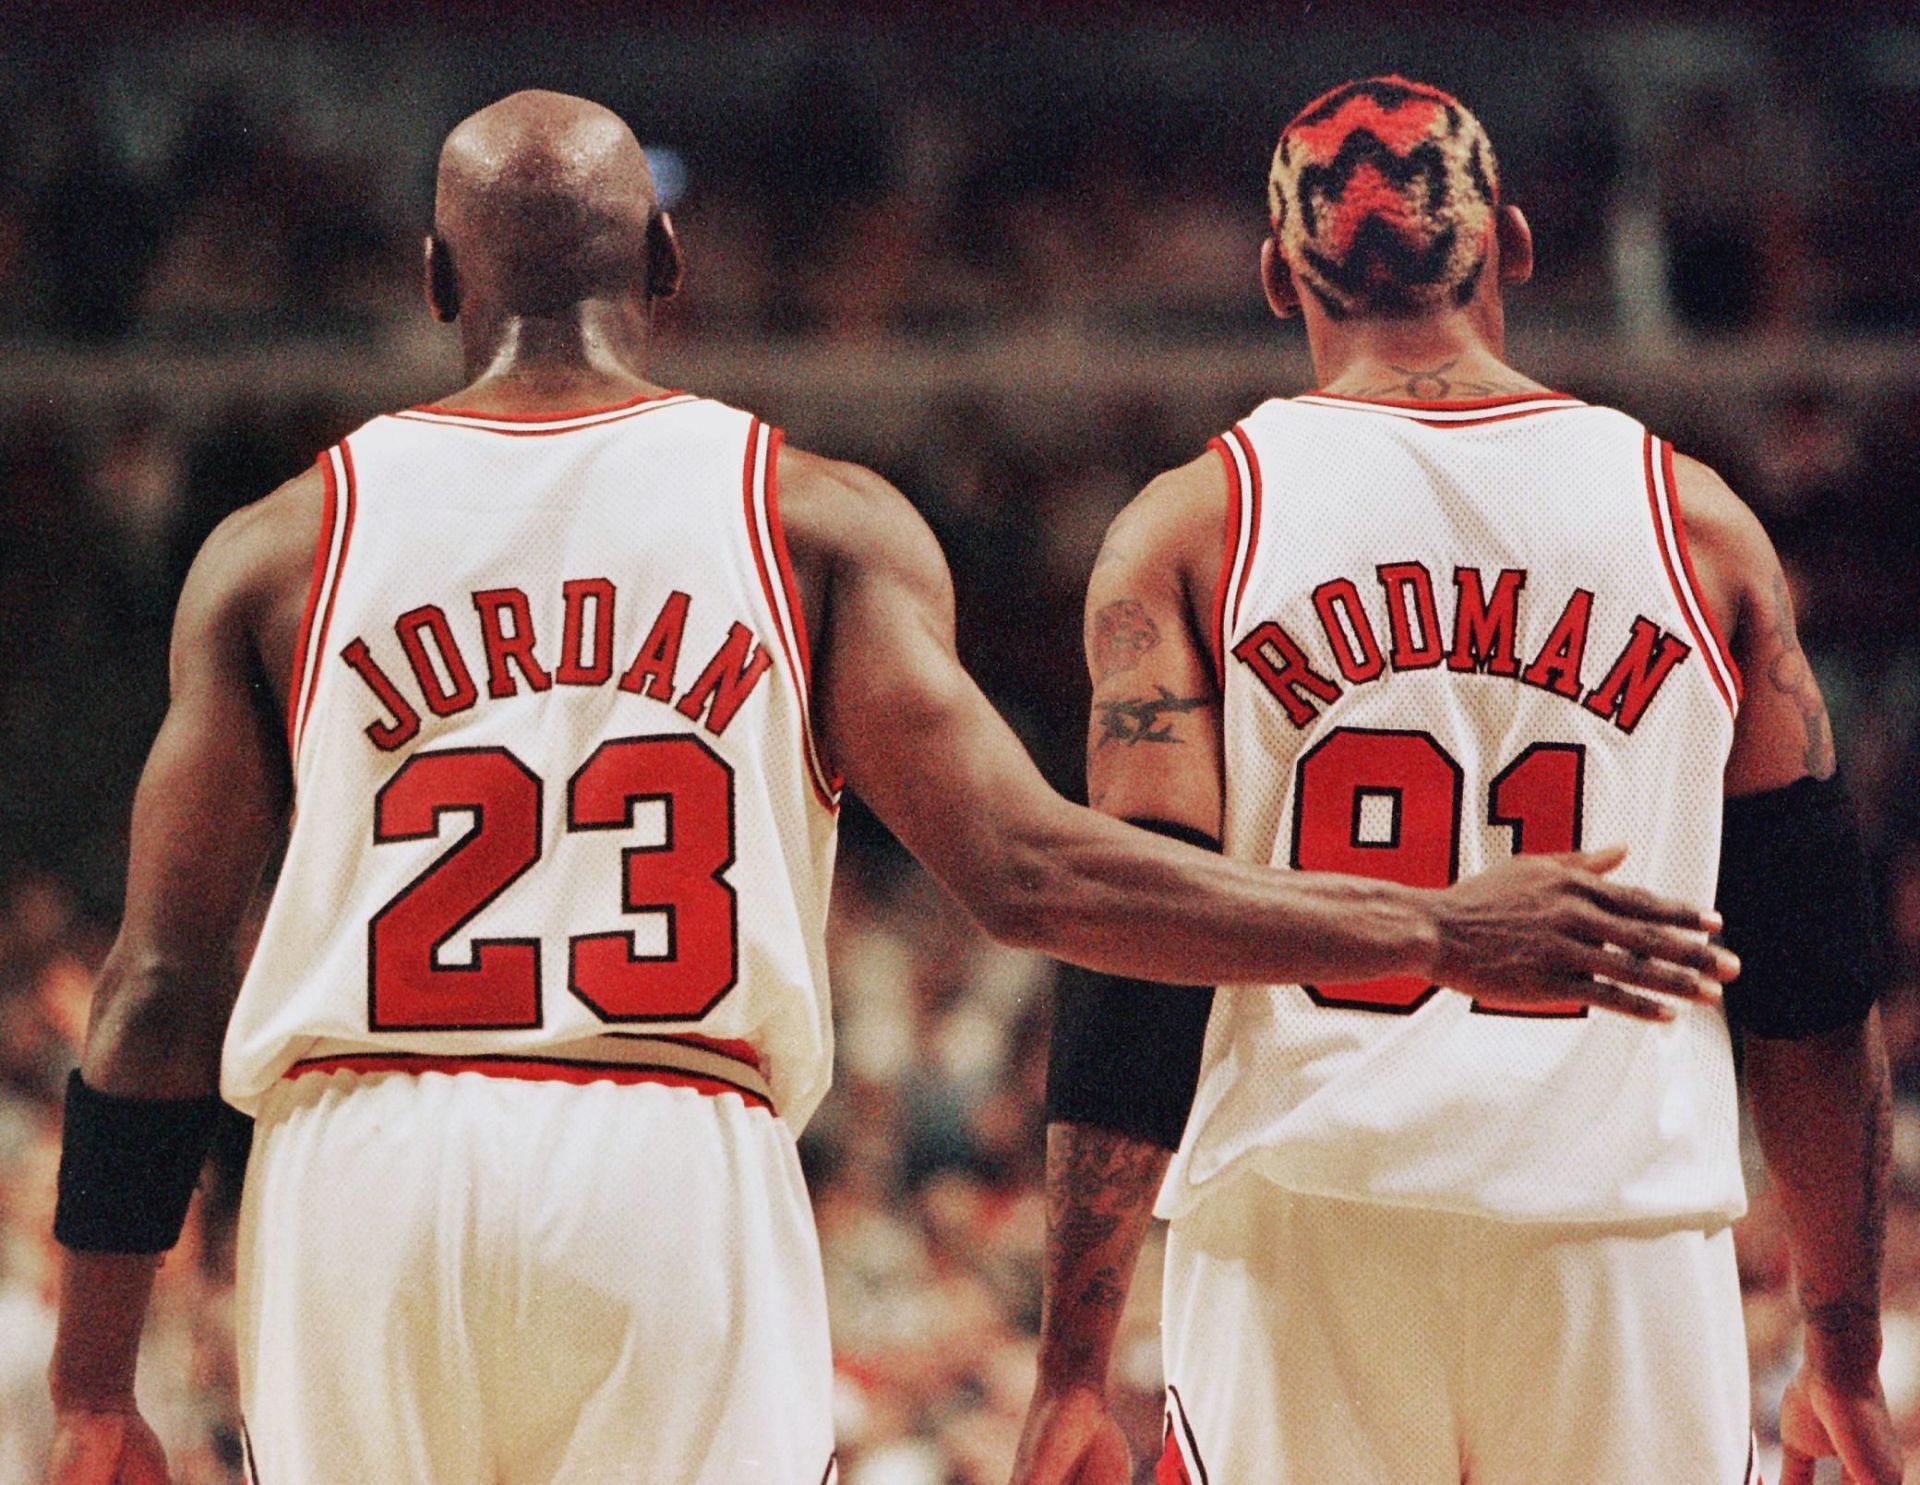 Dennis Rodman would have been a deserving co-MVP with Michael Jordan in the 1996 NBA Finals against the Seattle Supersonics. [Photo: Sportcasting]